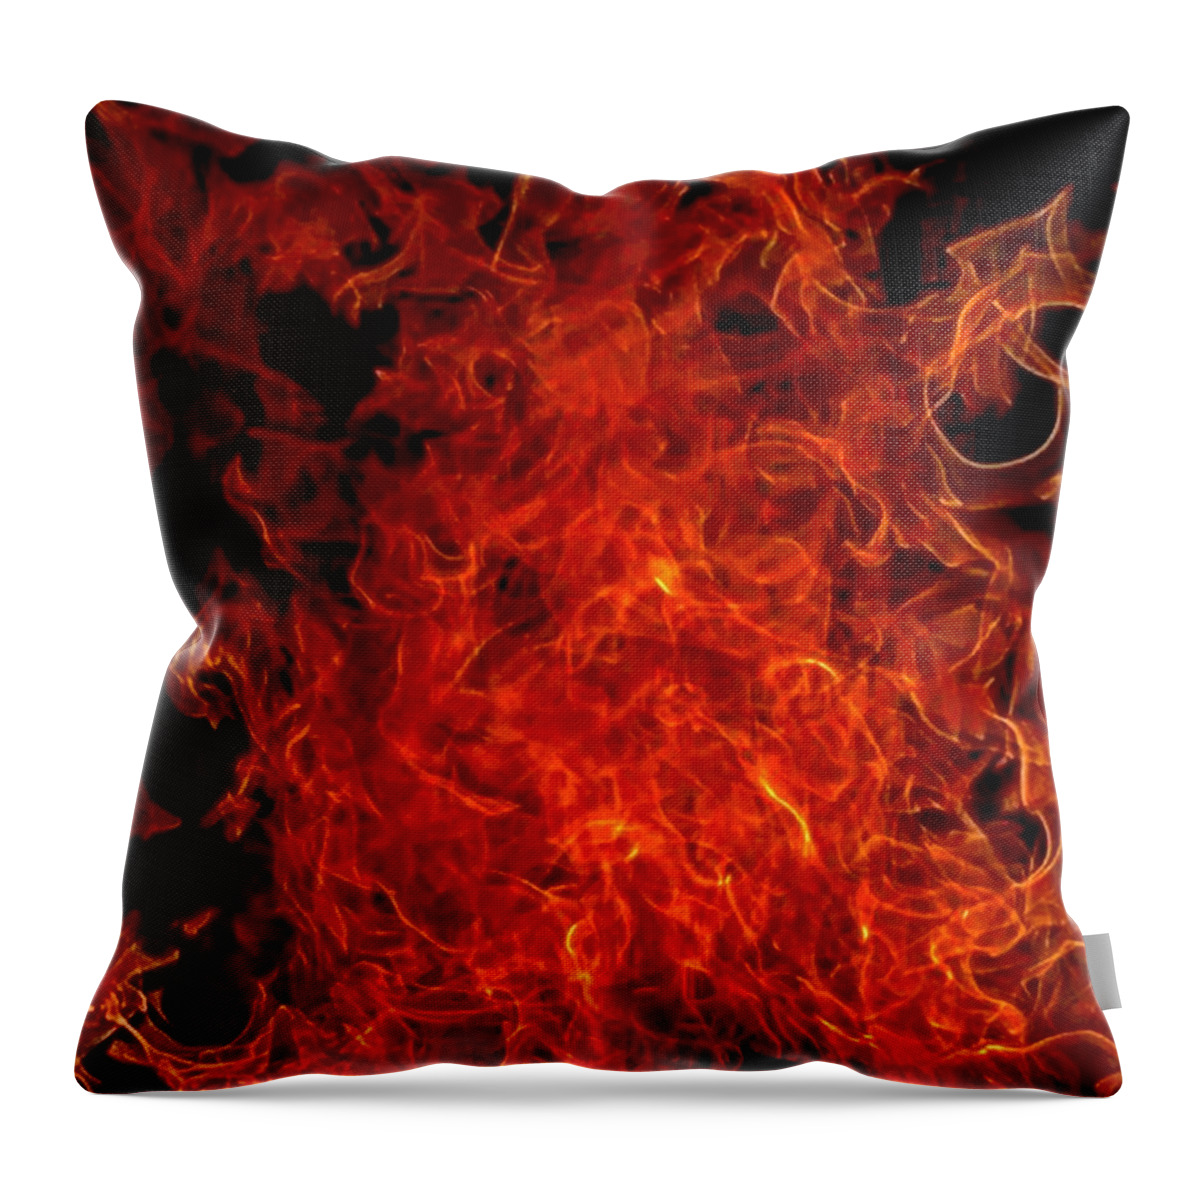 Fire Throw Pillow featuring the photograph Inferno by Michael Oceanofwisdom Bidwell